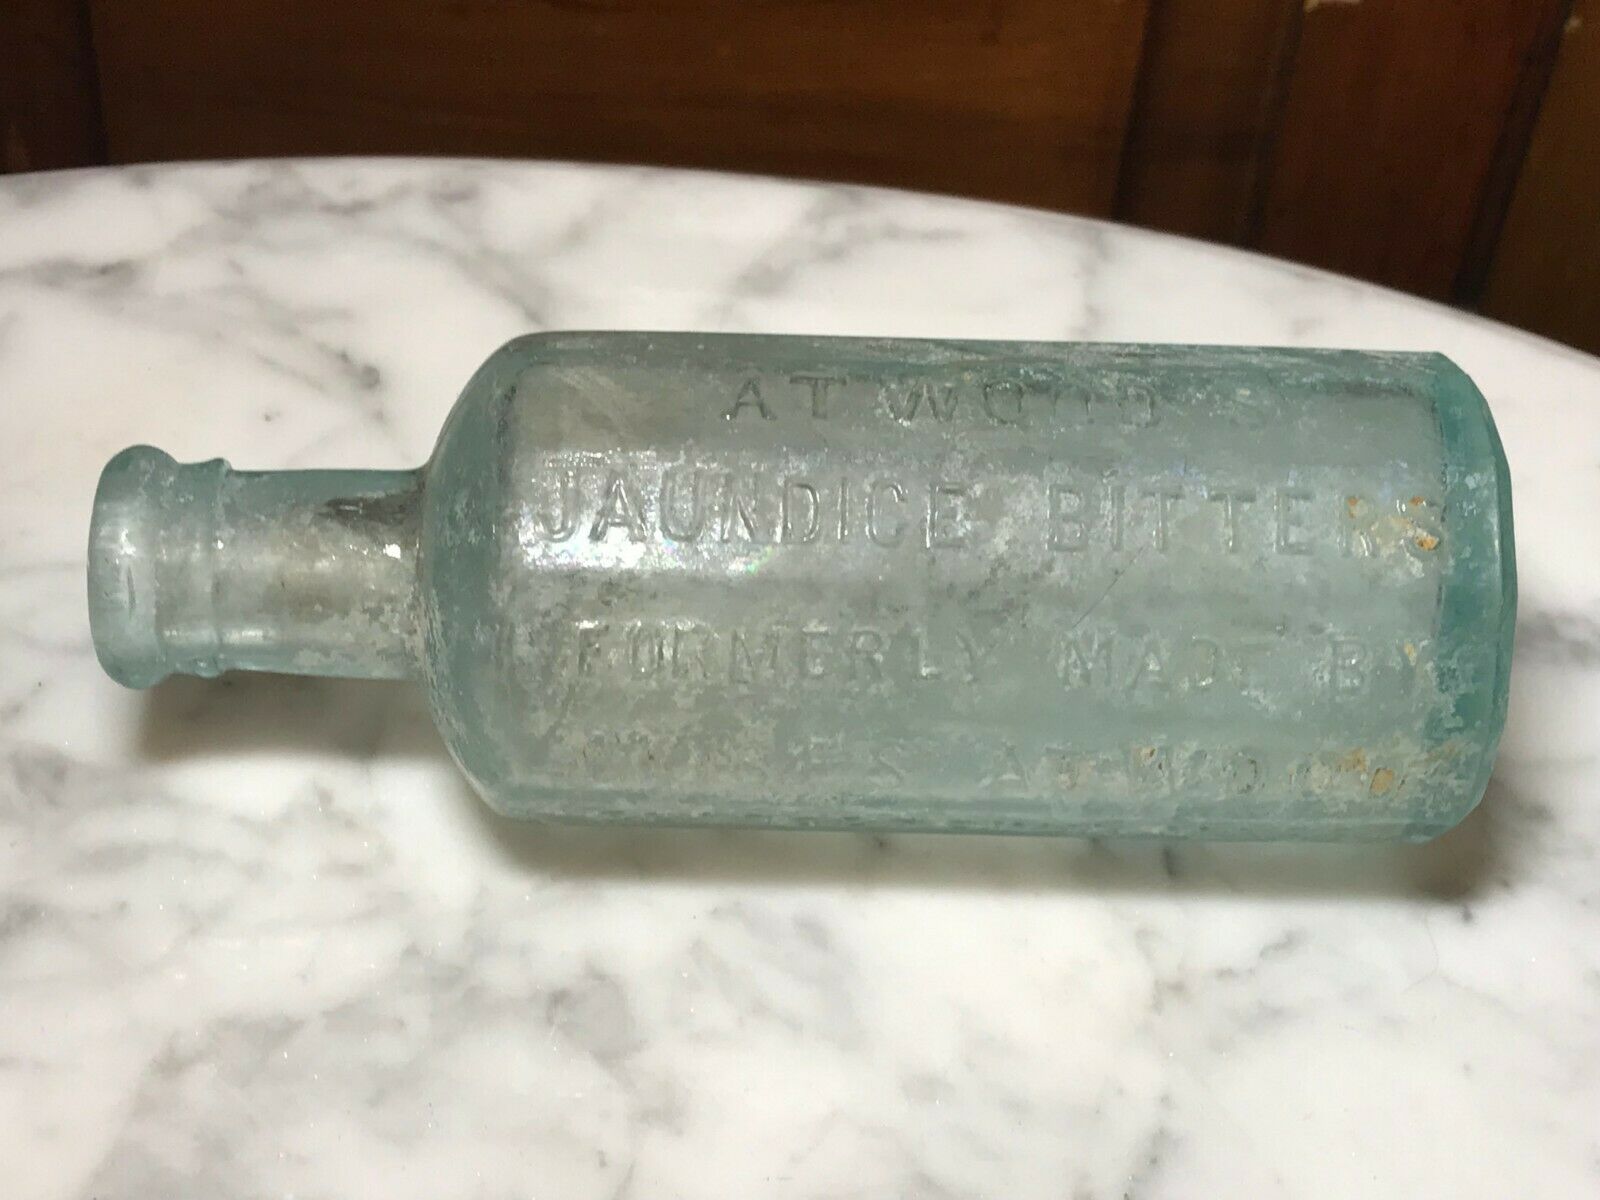 Formally Moses Atwood's Jaundice Bitters Bottle - 12-sided Georgetown Mass 6.5"